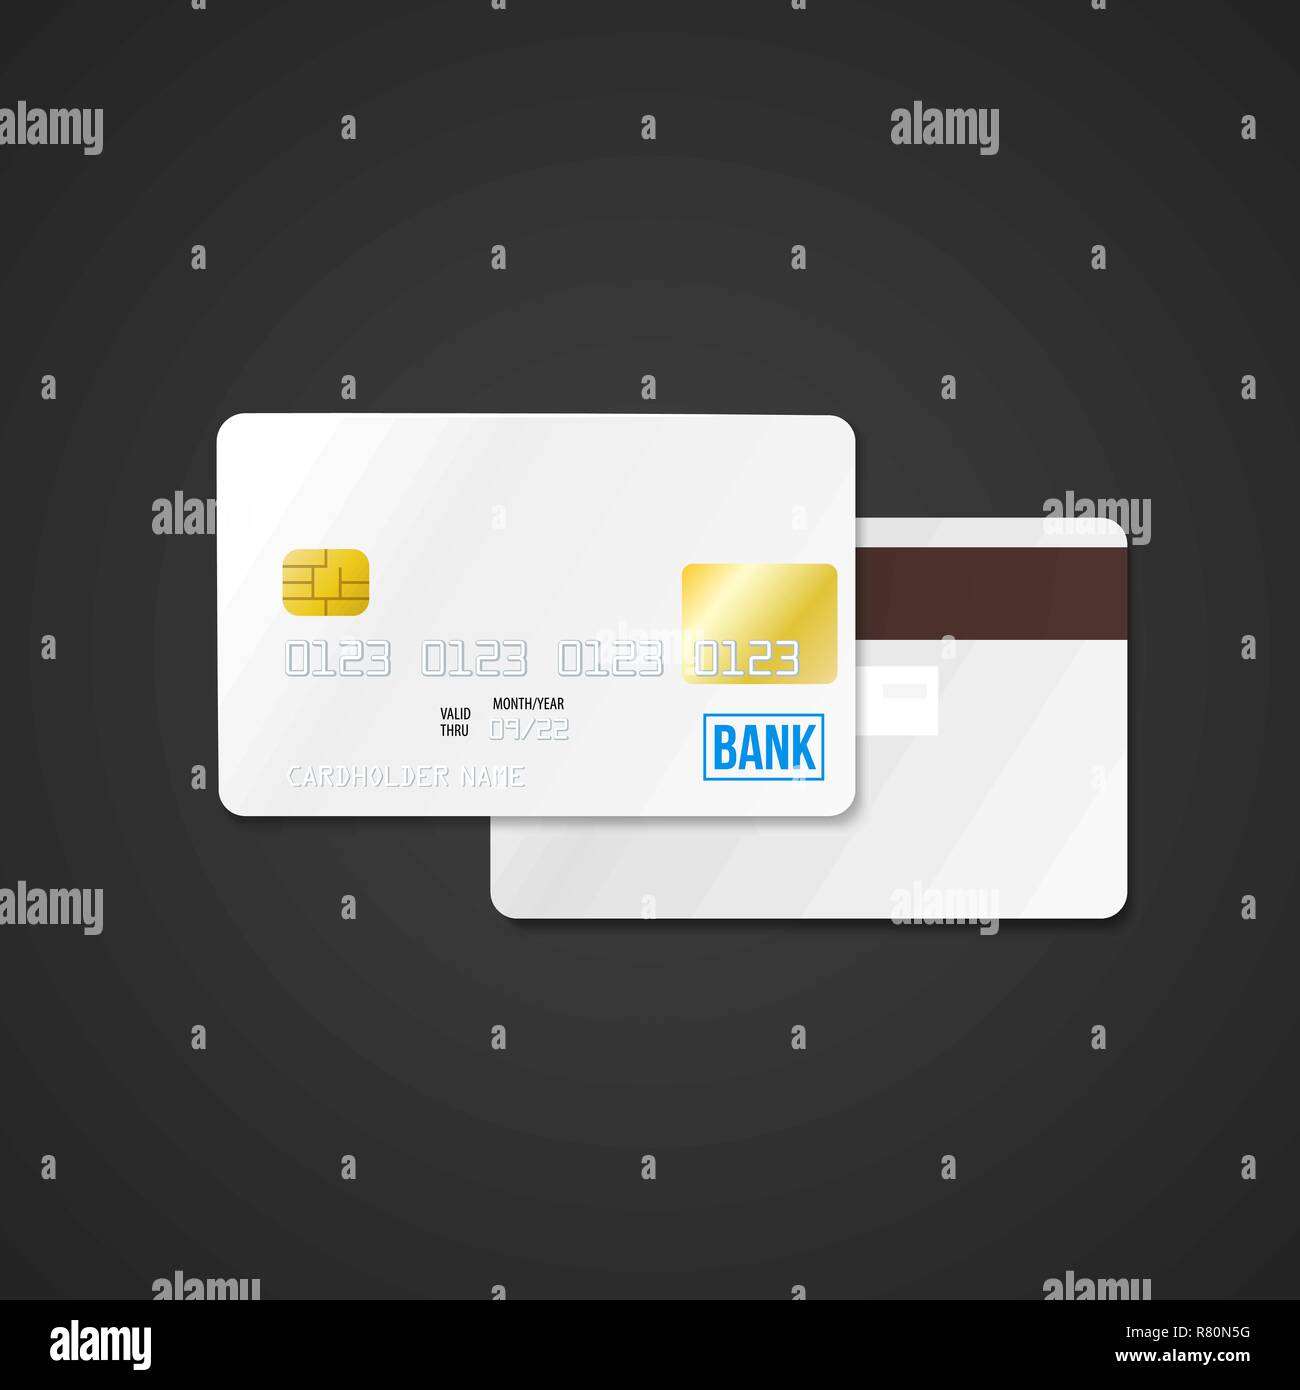 vector mock up white blank plastic bank card face and back sides illustration realistic with shadow template design isolated on dark background Stock Vector